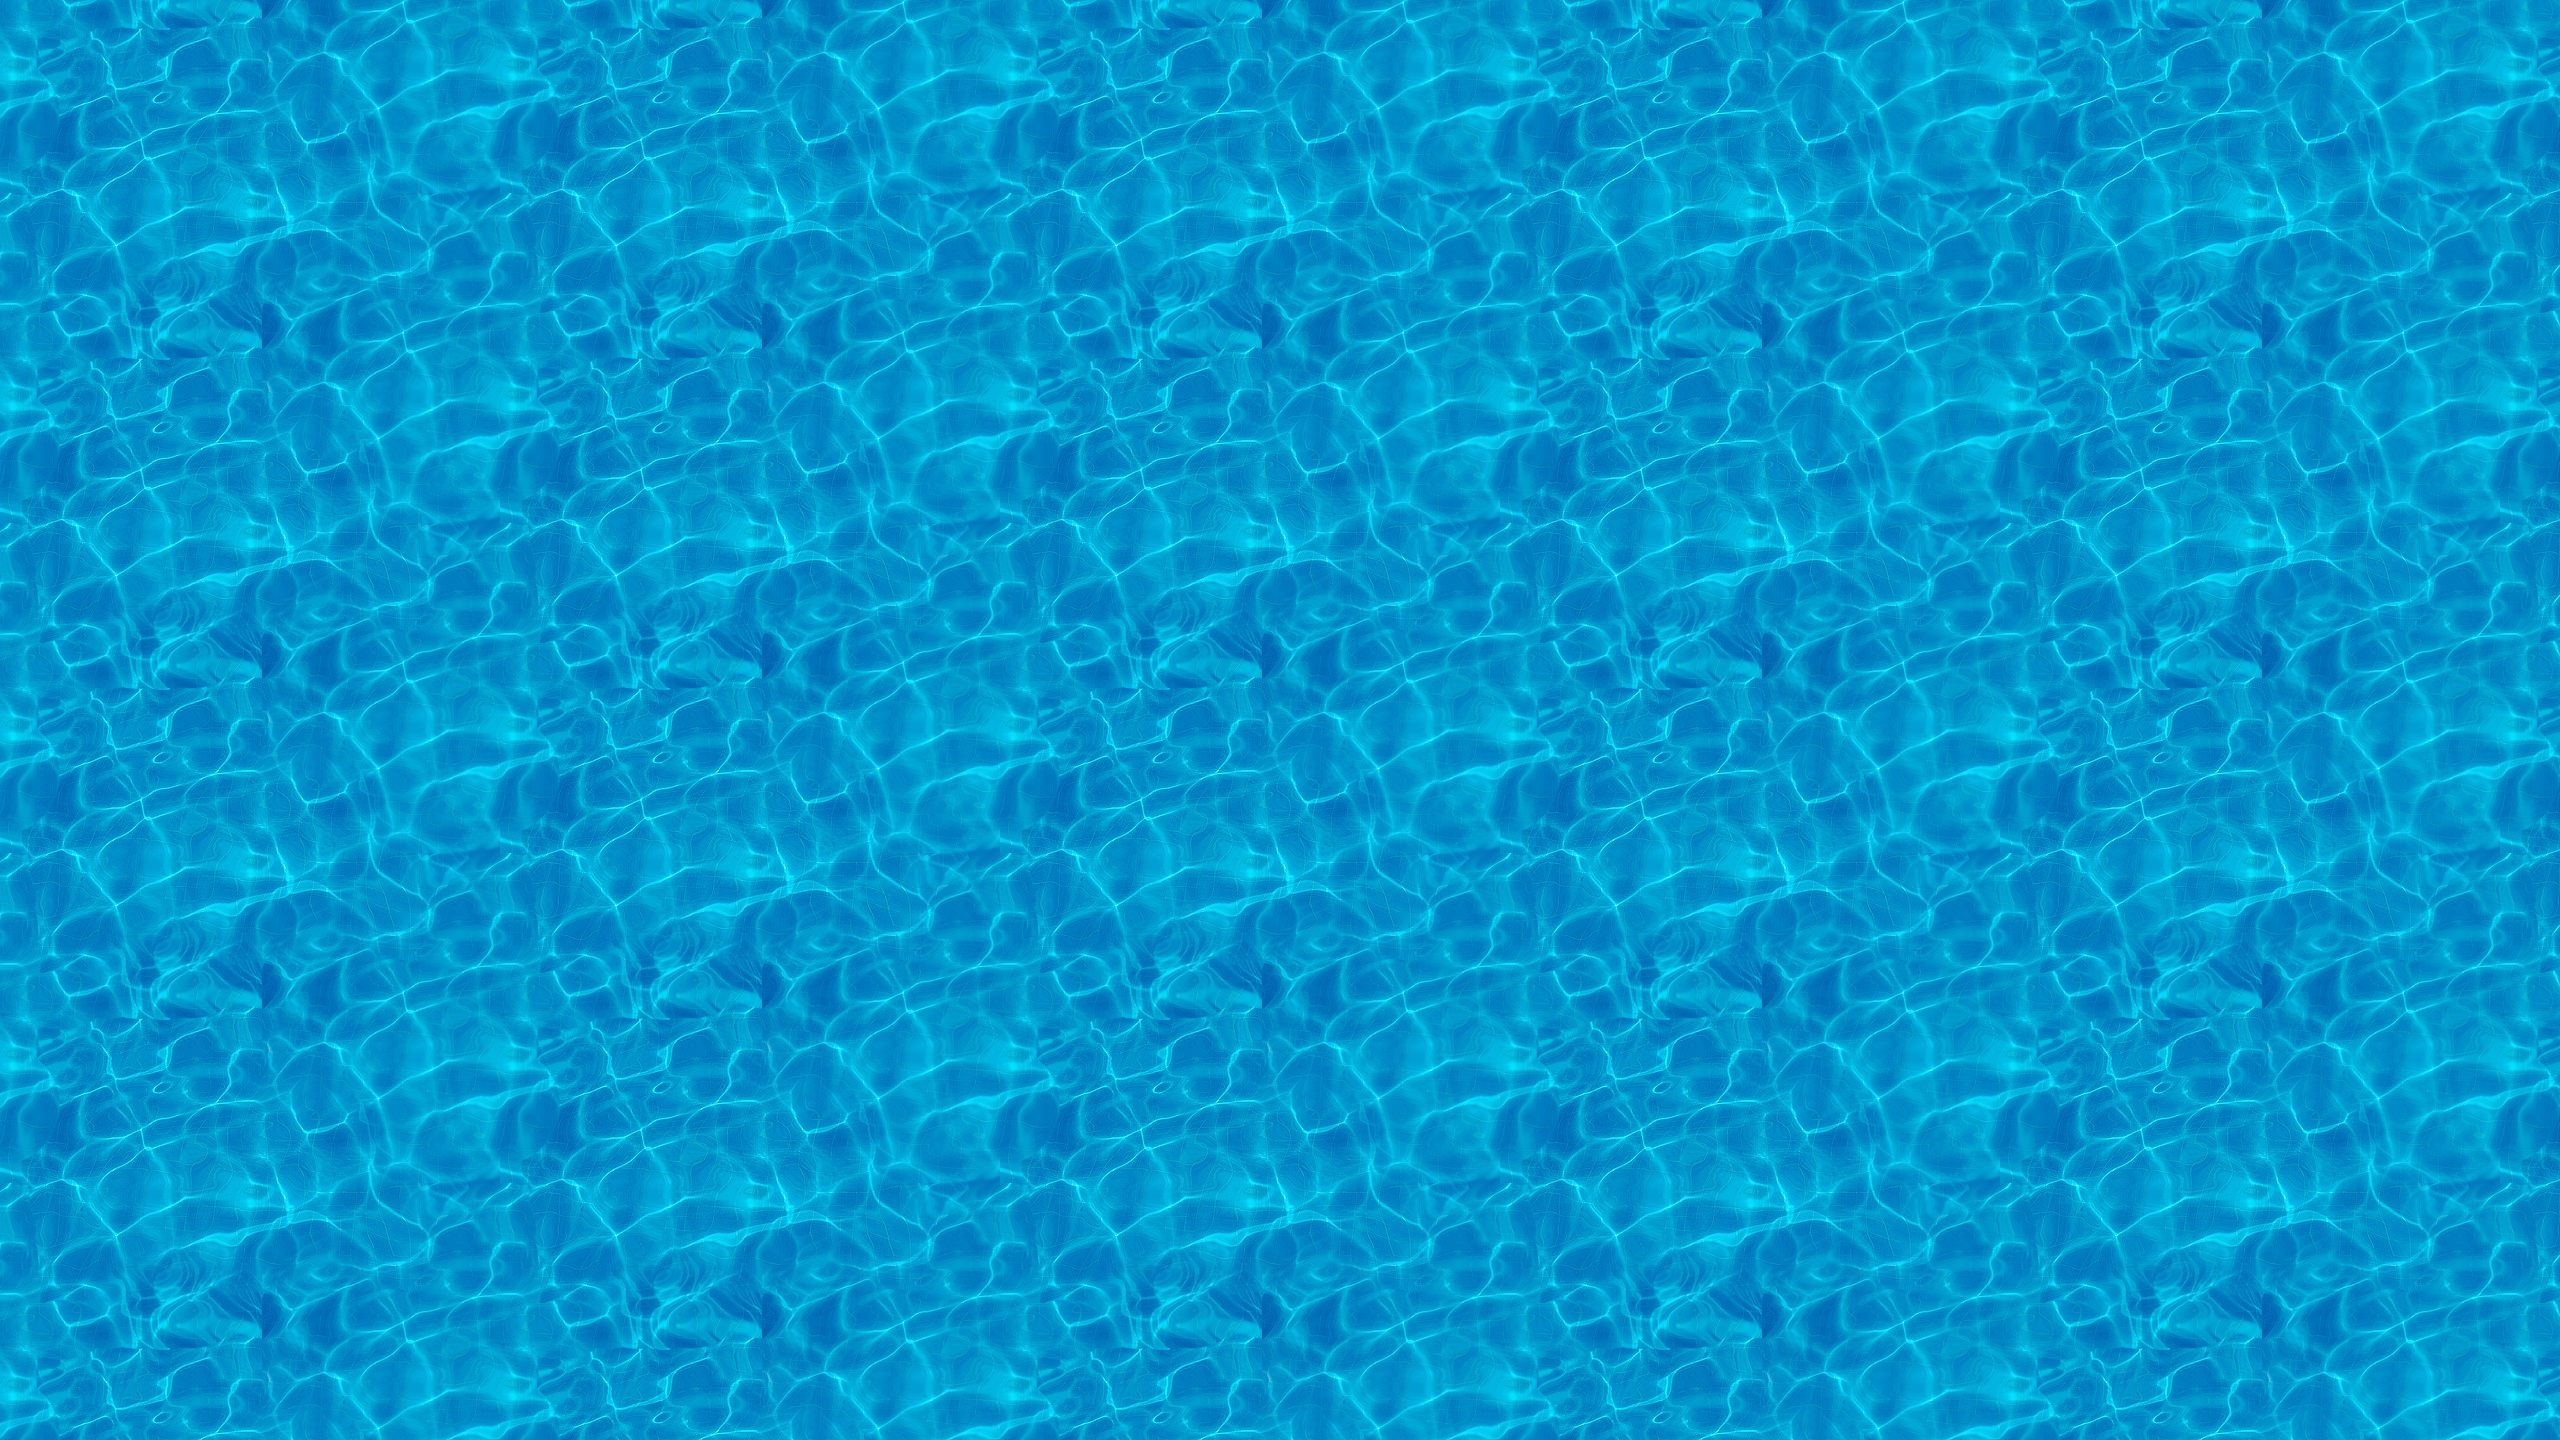 This Blue Water Desktop Wallpaper Is Easy Just Save The